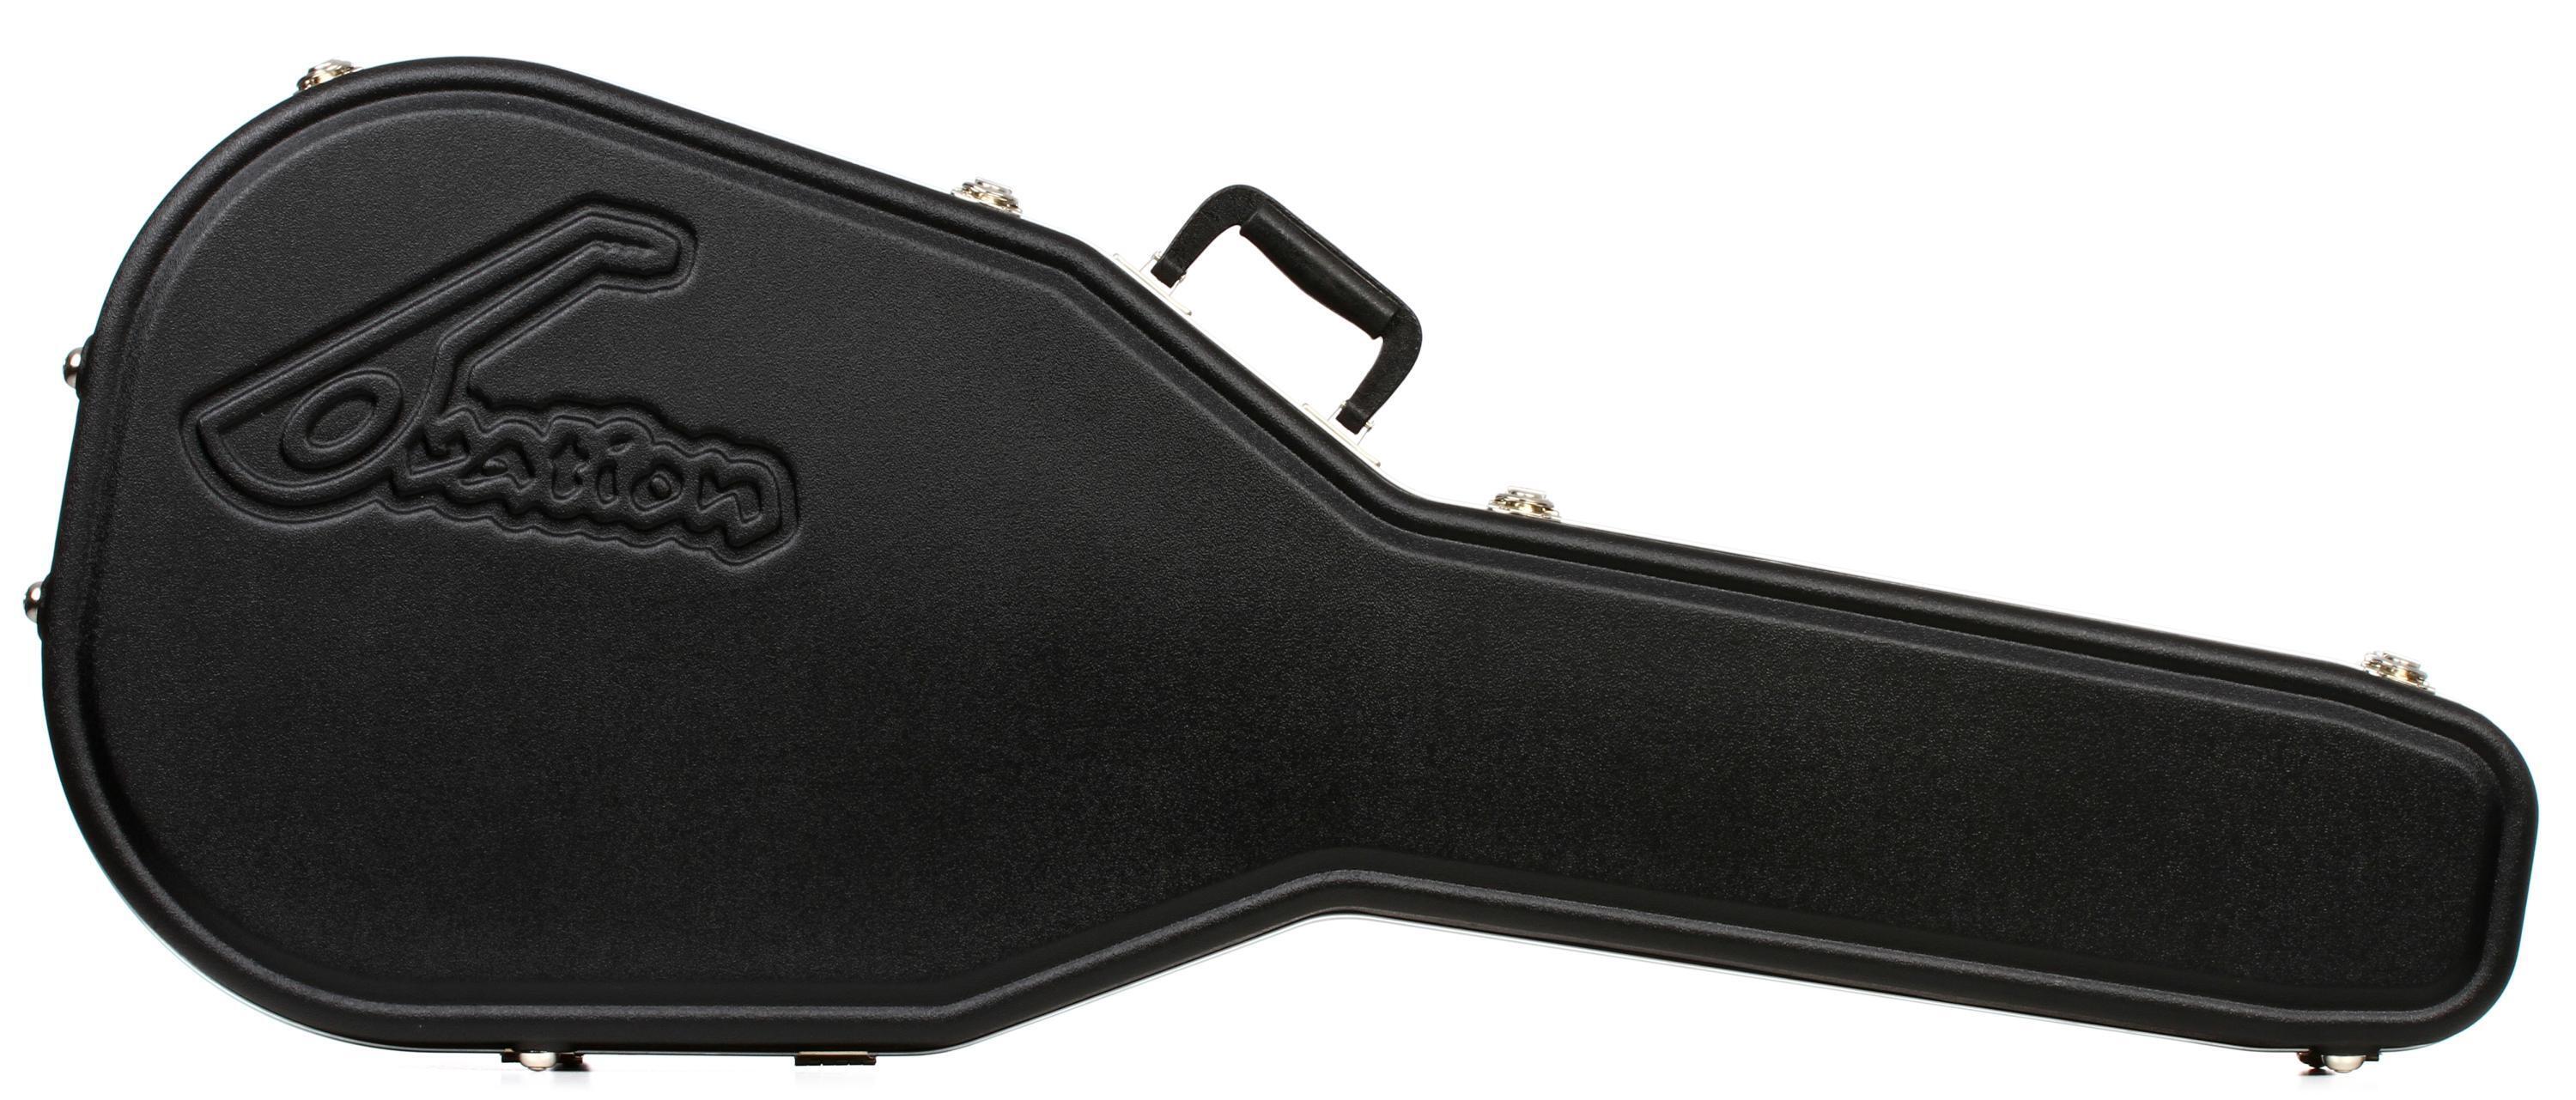 Ovation Standard Mid/Deep Molded Guitar Case - Black | Sweetwater